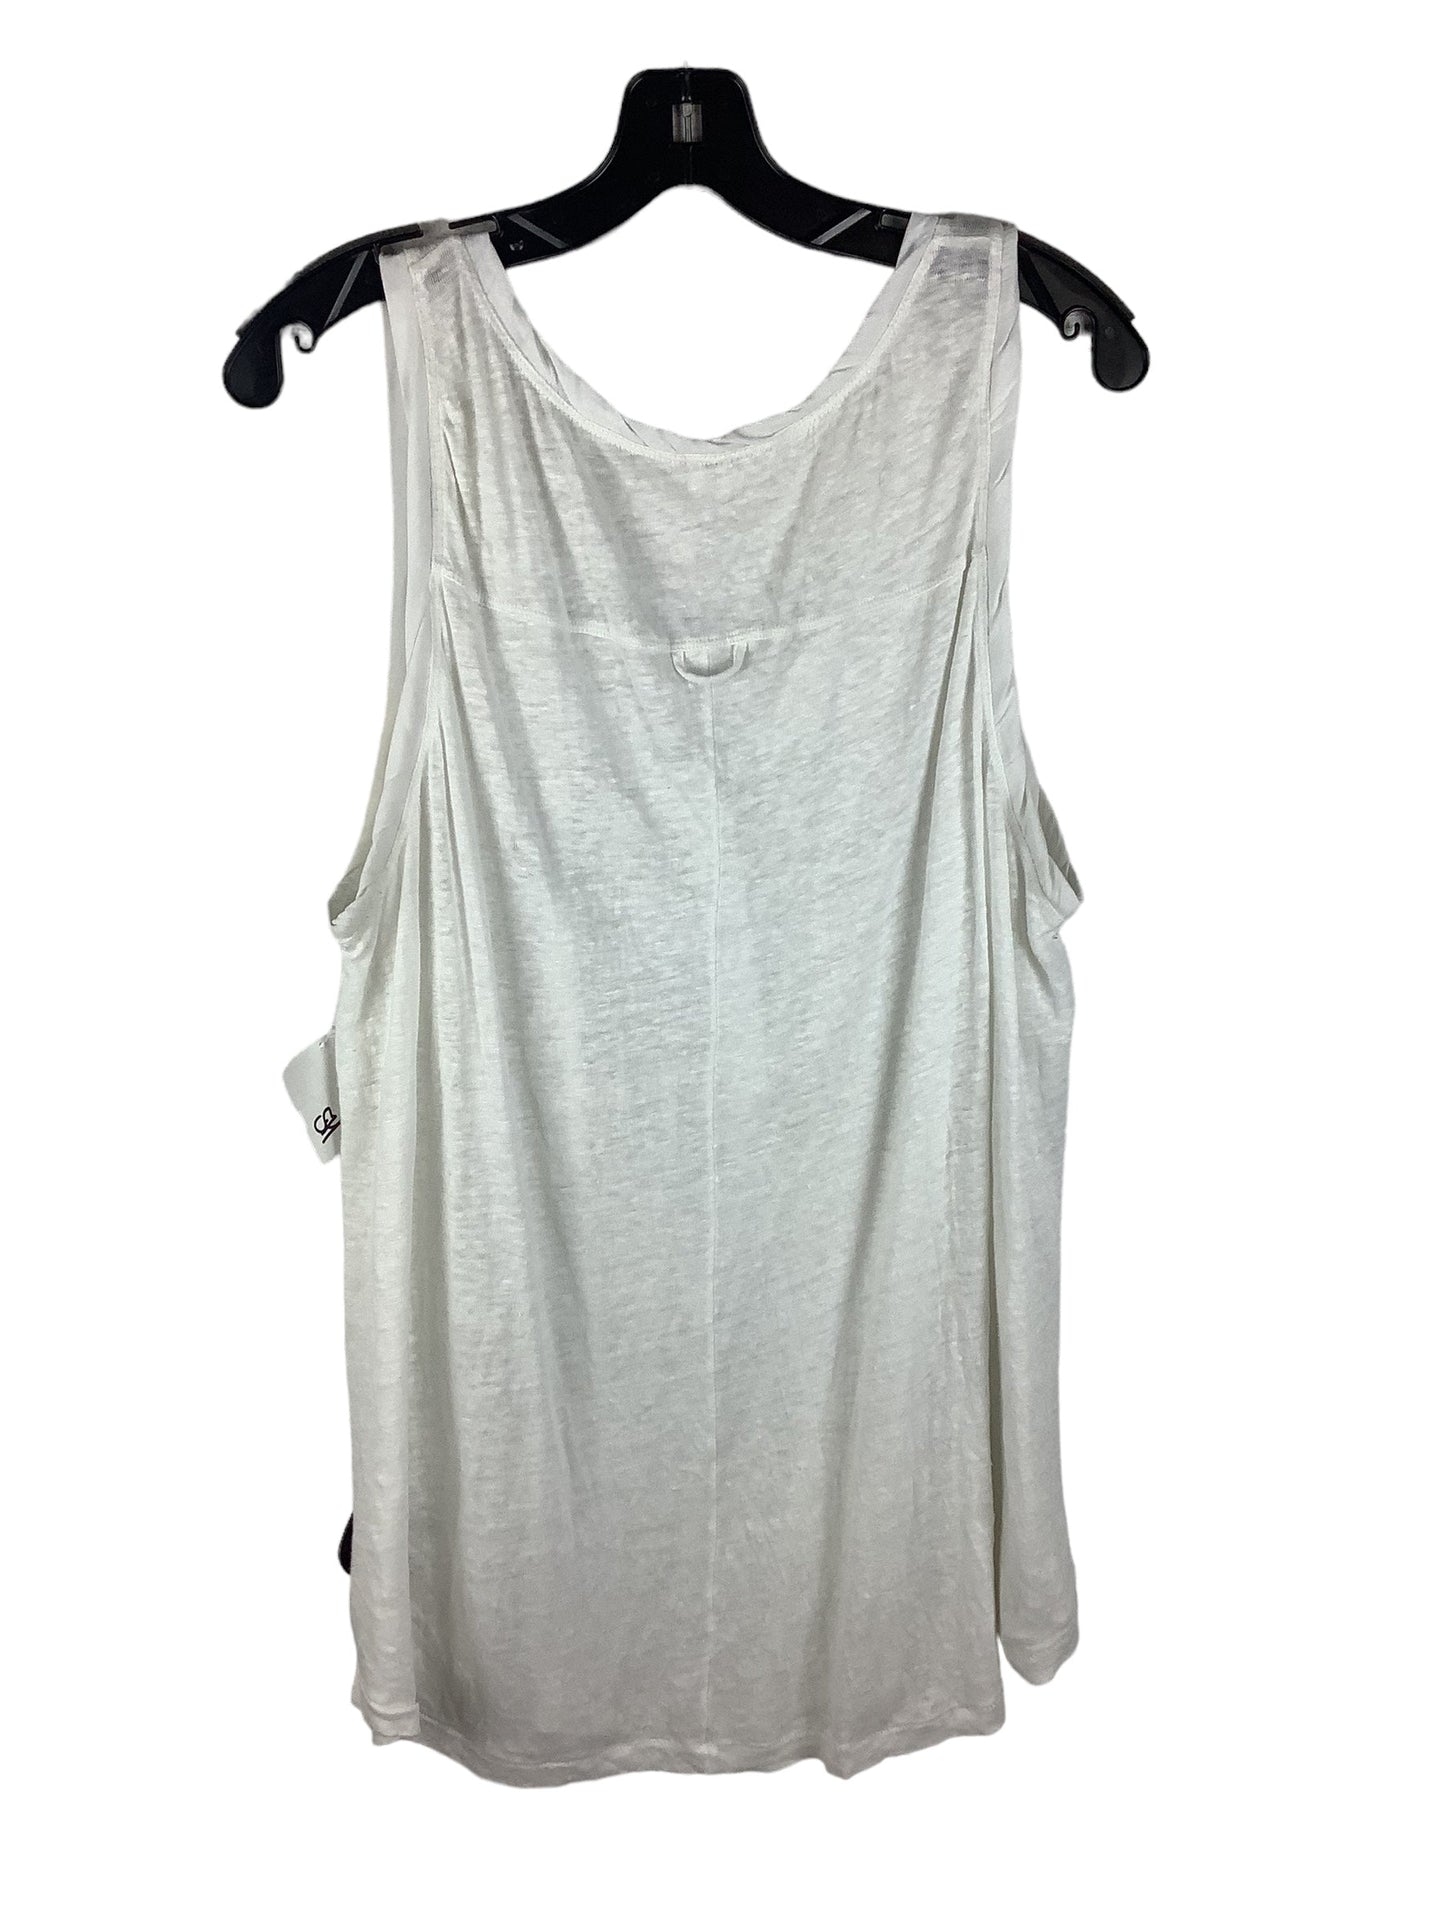 White Top Sleeveless Free People, Size L